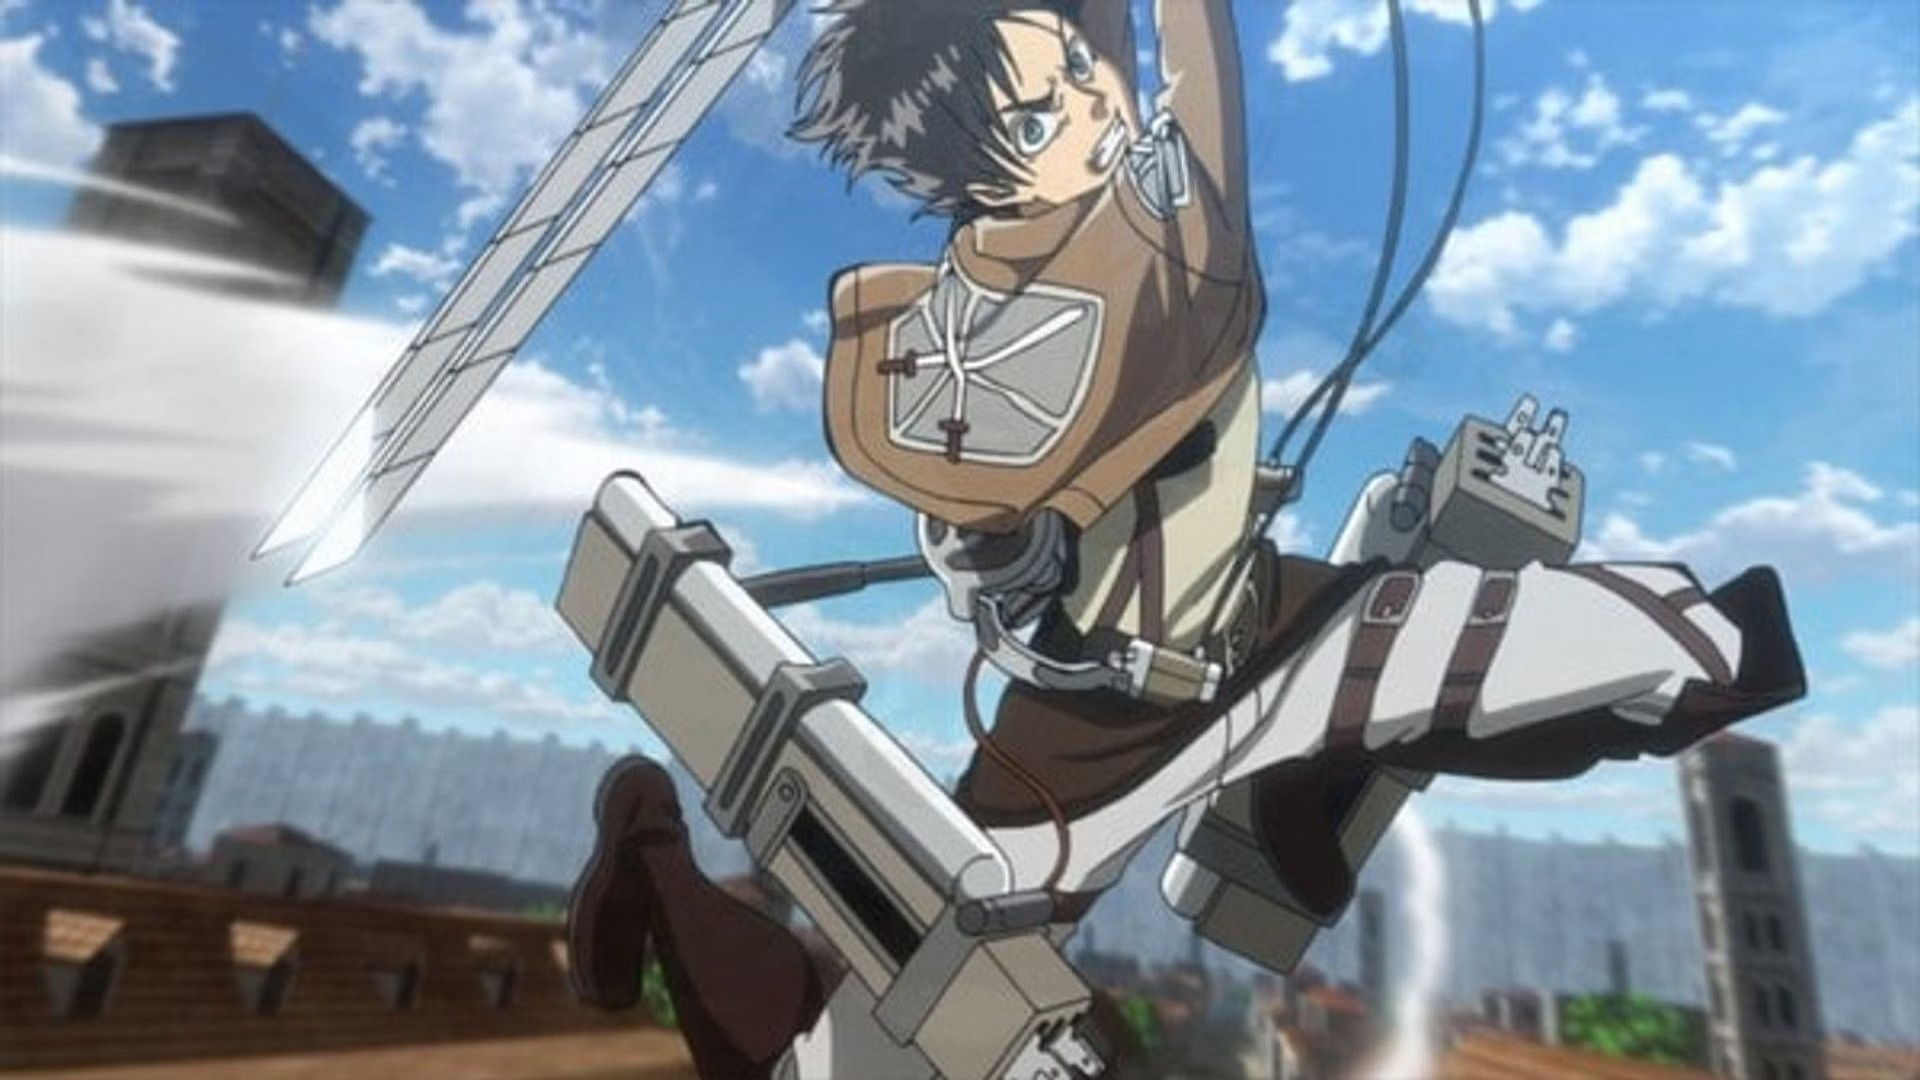 Fortnite Attack on Titan: what we know about the crossover